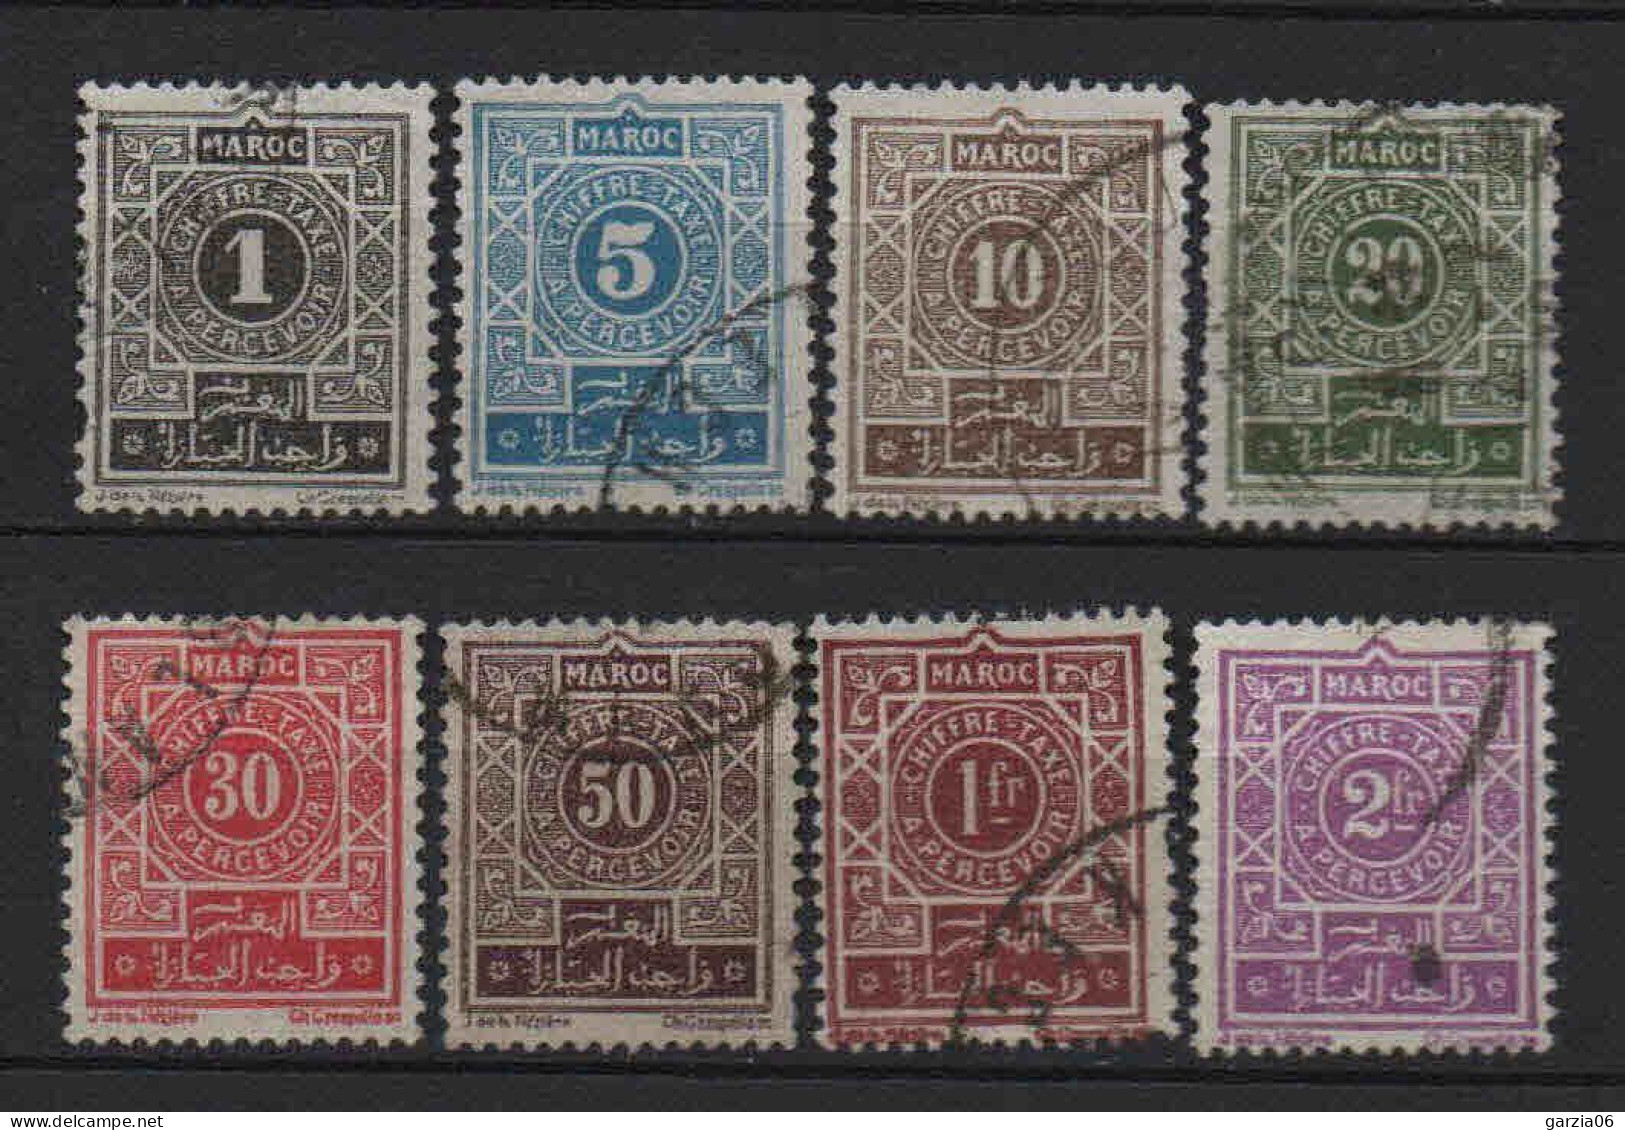 Maroc - 1917 - Timbres Taxe -  N° 27 à 34 - Oblit - Used - Timbres-taxe